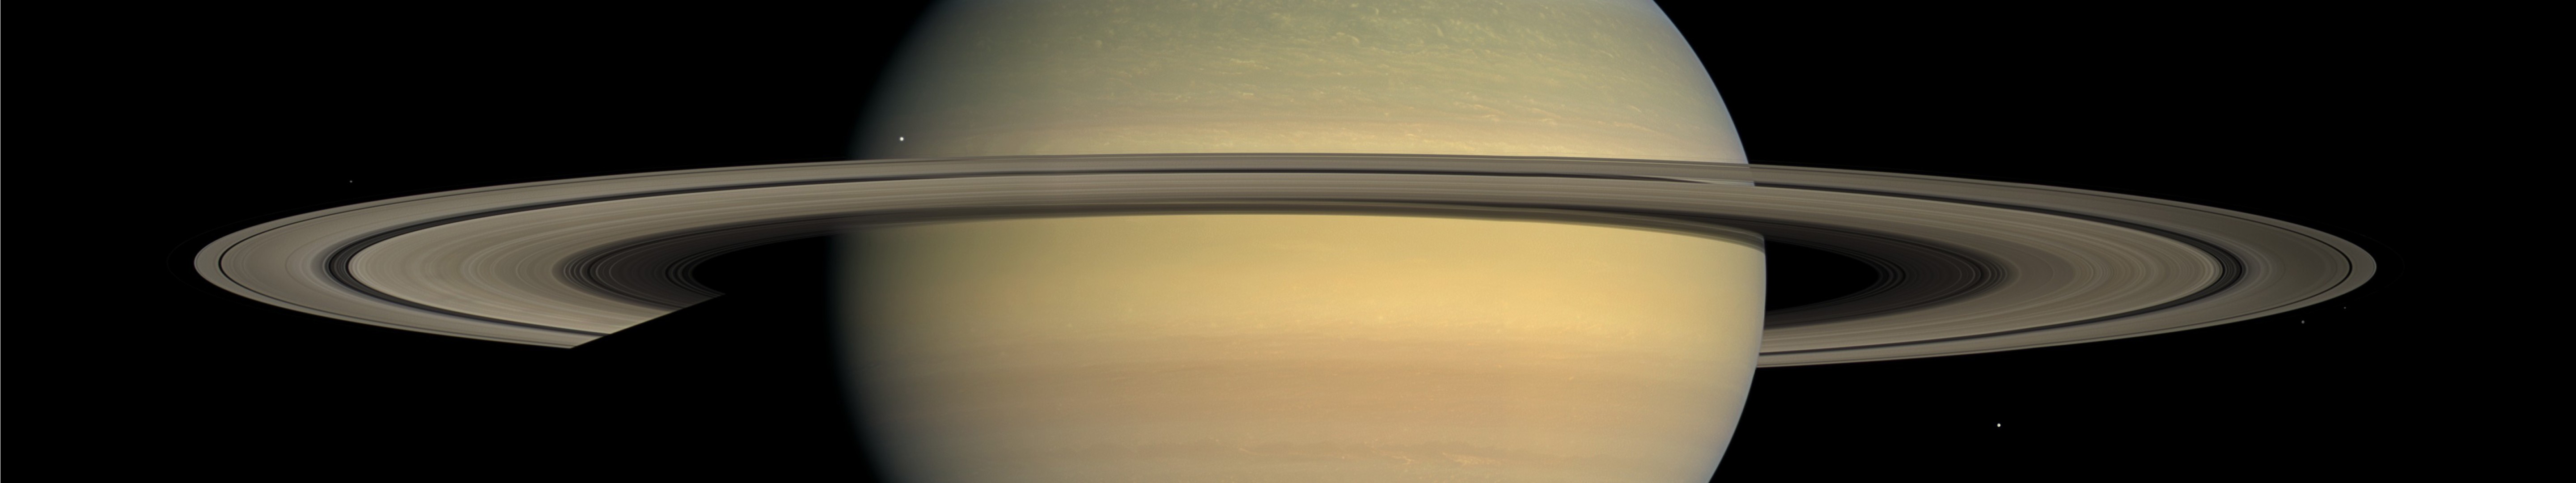 General 5760x1080 Saturn planet space Solar System NASA planetary rings